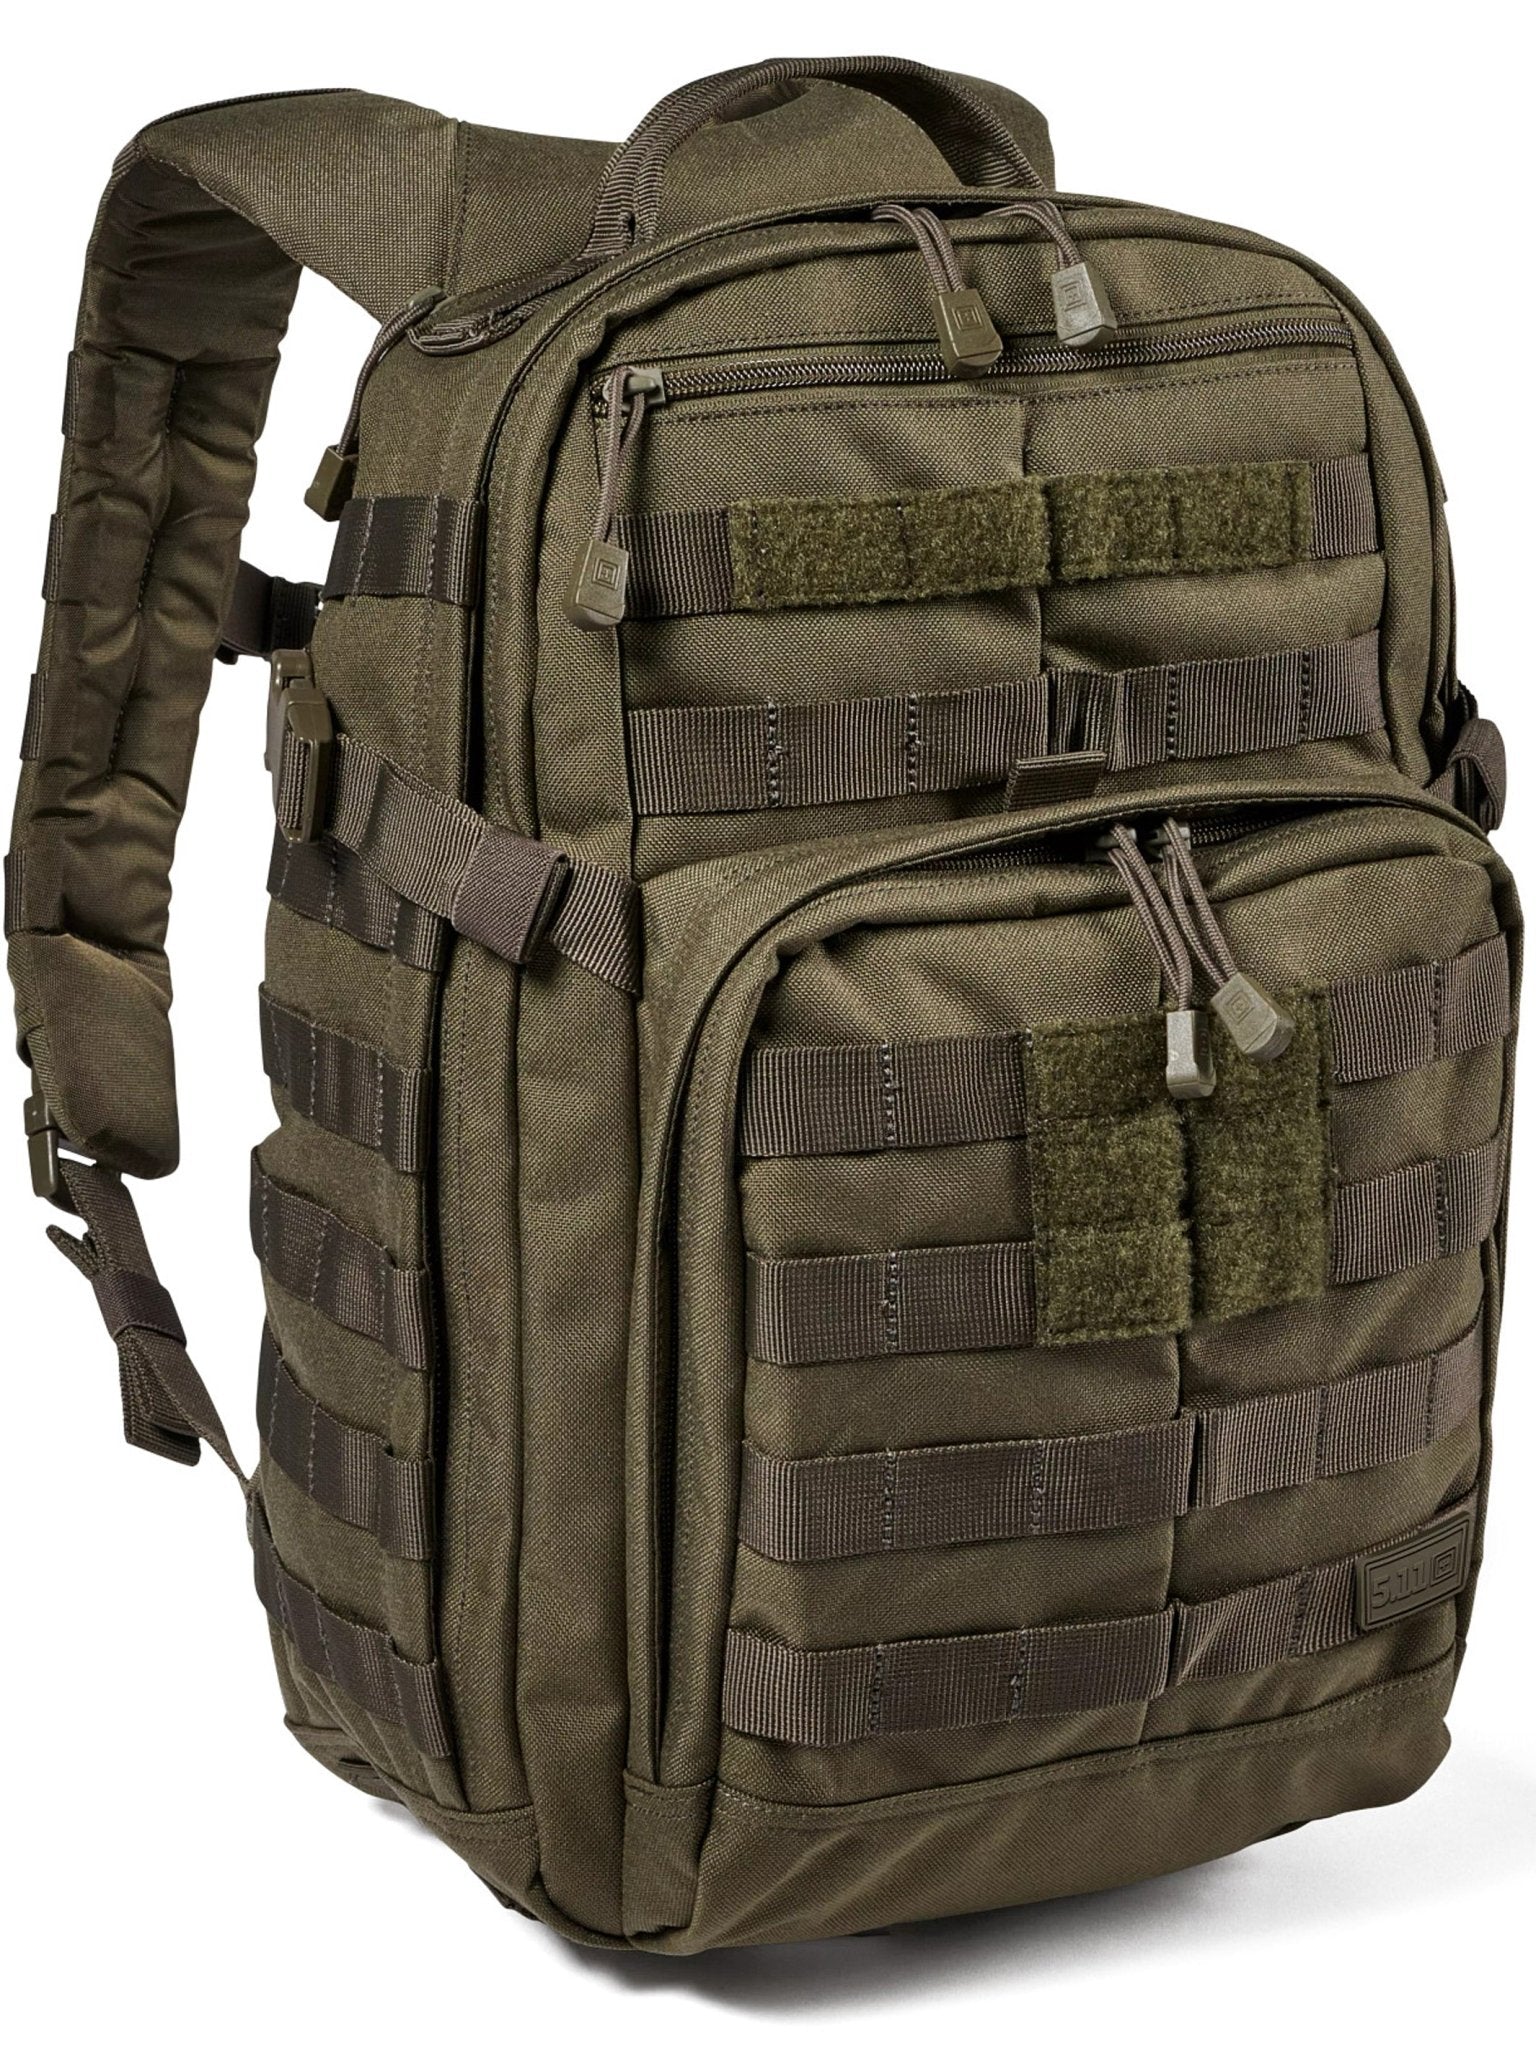 4elementsclothing5.11 Tactical5.11 Tactical - 5.11 Tactical Rush 12 2.0 Backpack with Laptop compartment - Style 56561Bag56561-186